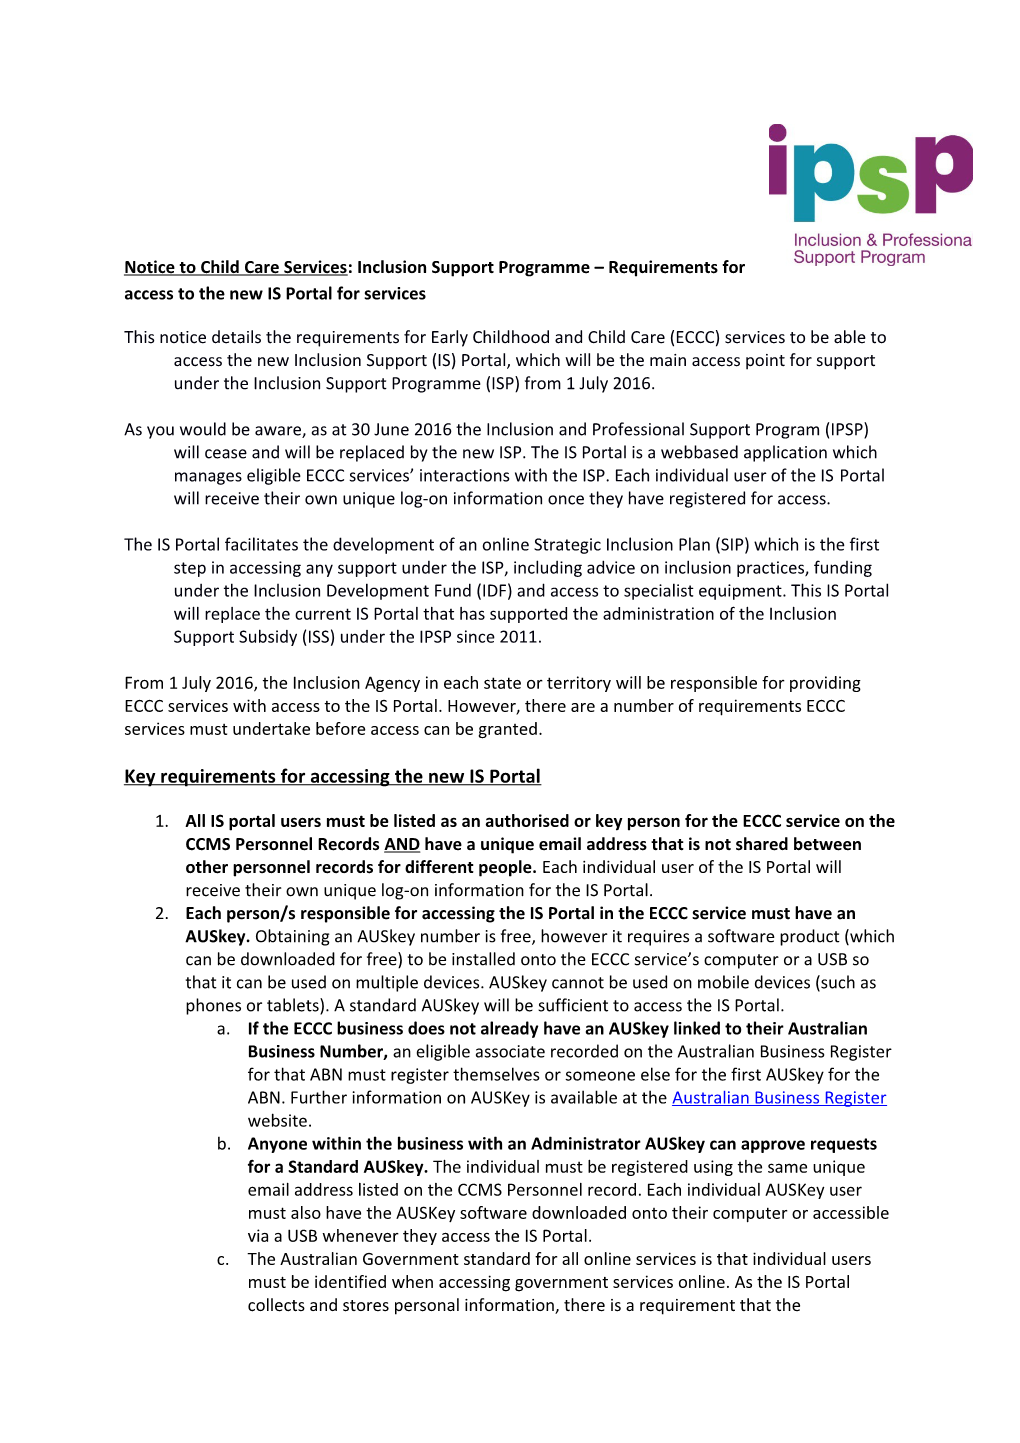 Notice to Child Care Services:Inclusion Support Programme Requirements for Access to The